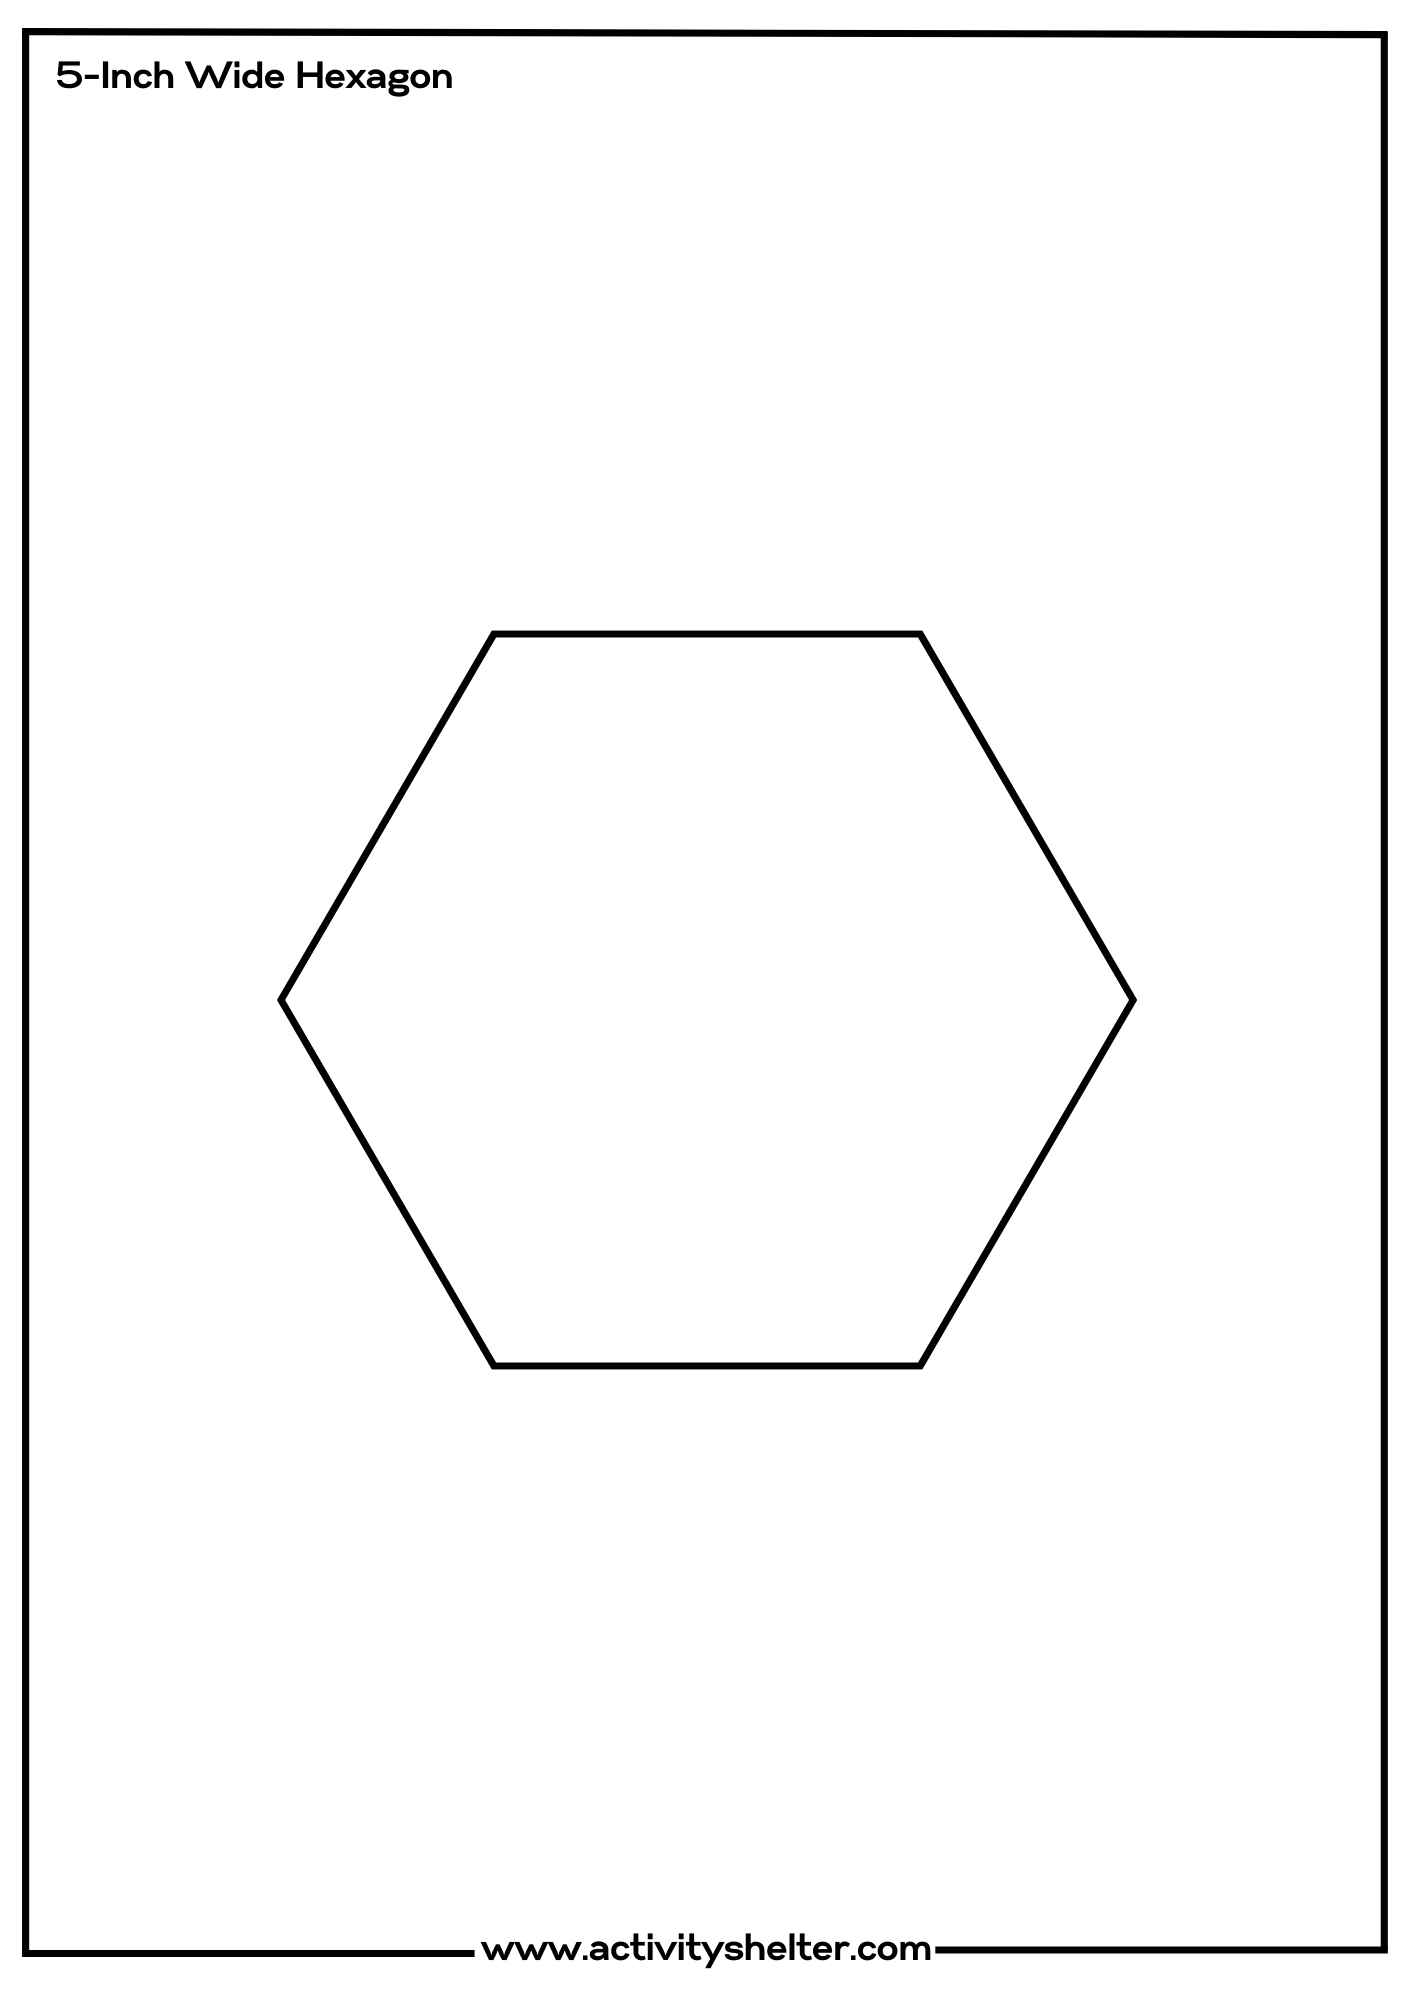 Template for Hexagon 5-Inch Wide